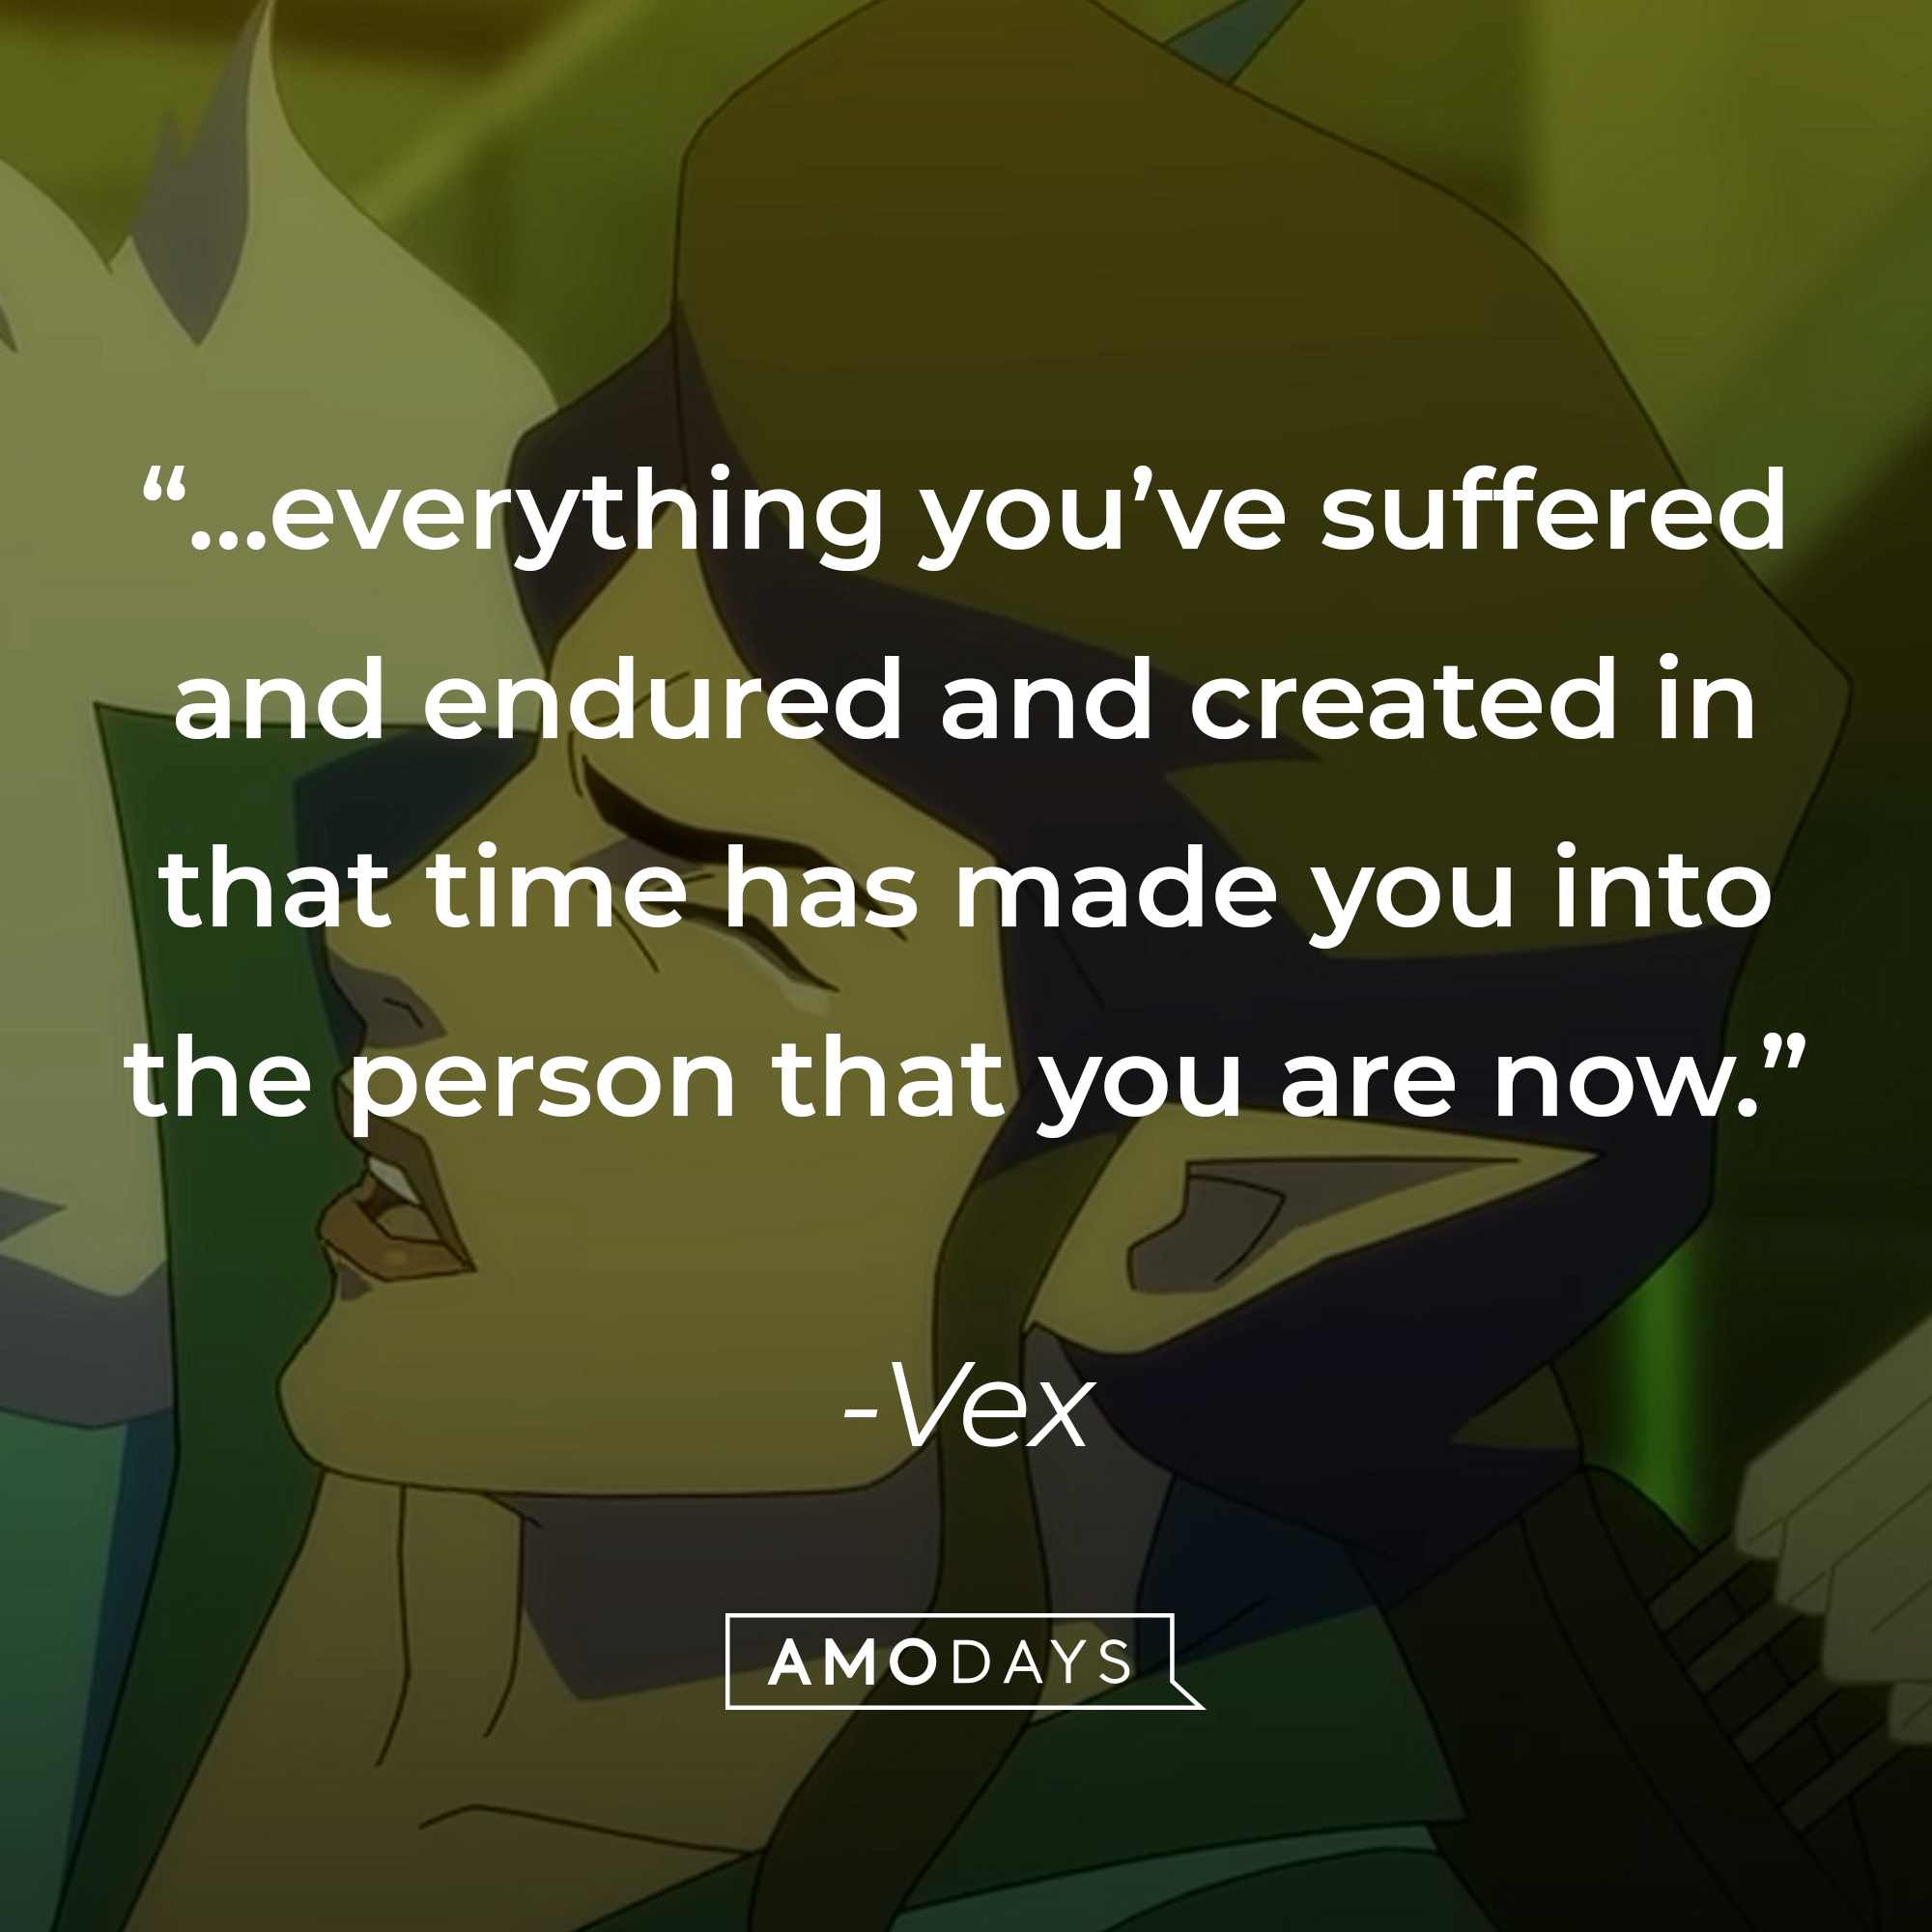 An image of Vex with her quote: “…everything you’ve suffered and endured and created in that time has made you into the person that you are now.” |  Source: youtube.com/PrimeVide